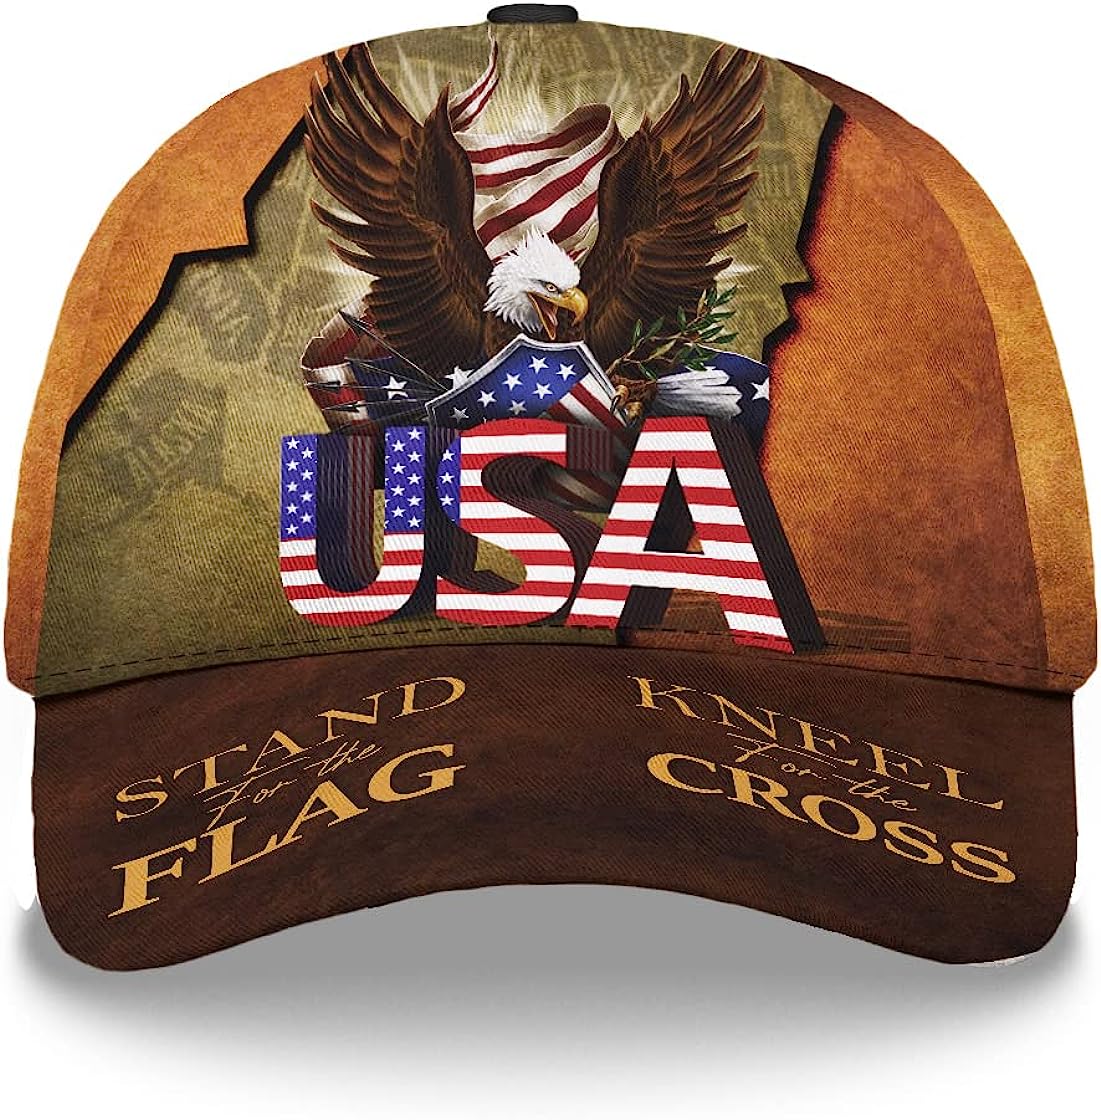 Stand For Flag Kneel For Cross Classic Hat All Over Print - Christian Hats for Men and Women